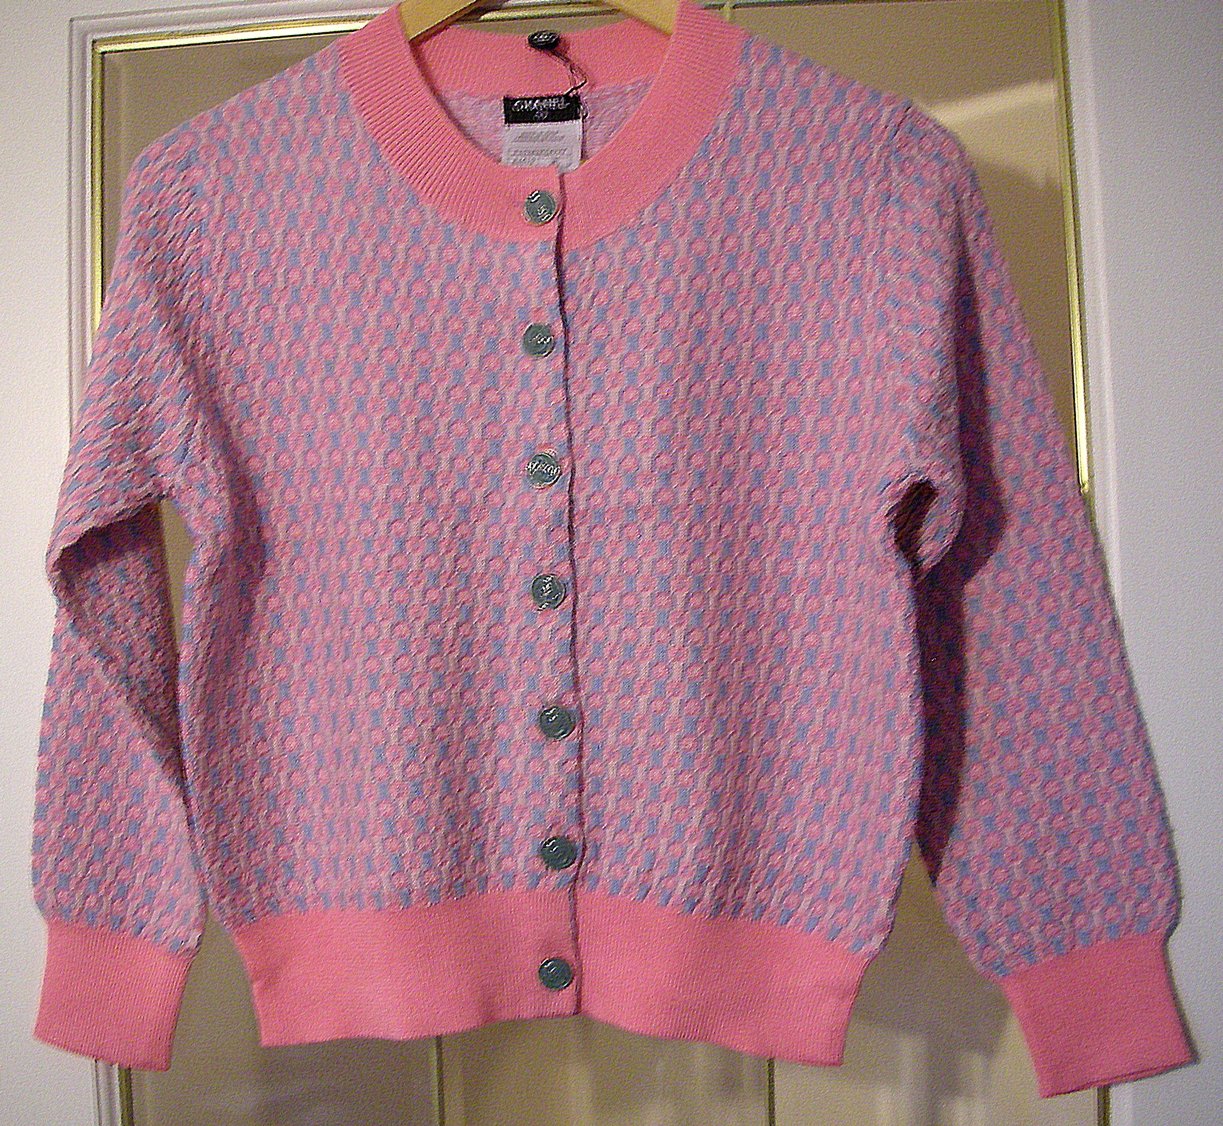 Chanel Sweater Knitwear Cardigan Pink/Grey Checker Cotton Blend Size 38(italy) Nwot!